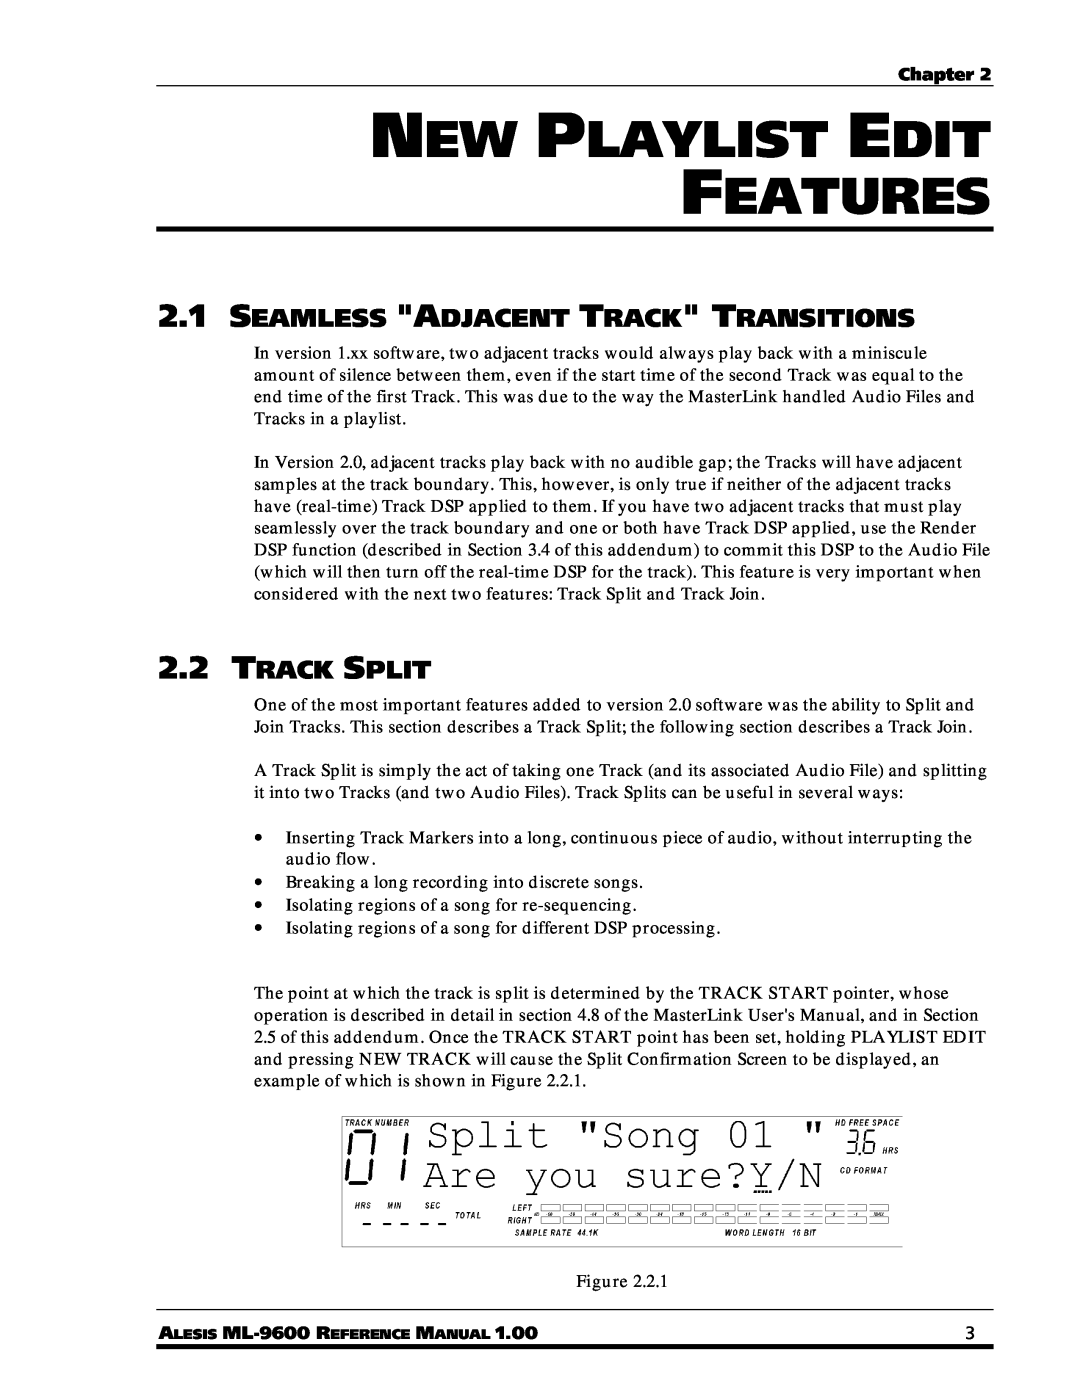 Alesis ML-9600 owner manual New Playlist Edit Features, 2.1SEAMLESS ADJACENT TRACK TRANSITIONS, 2.2TRACK SPLIT 